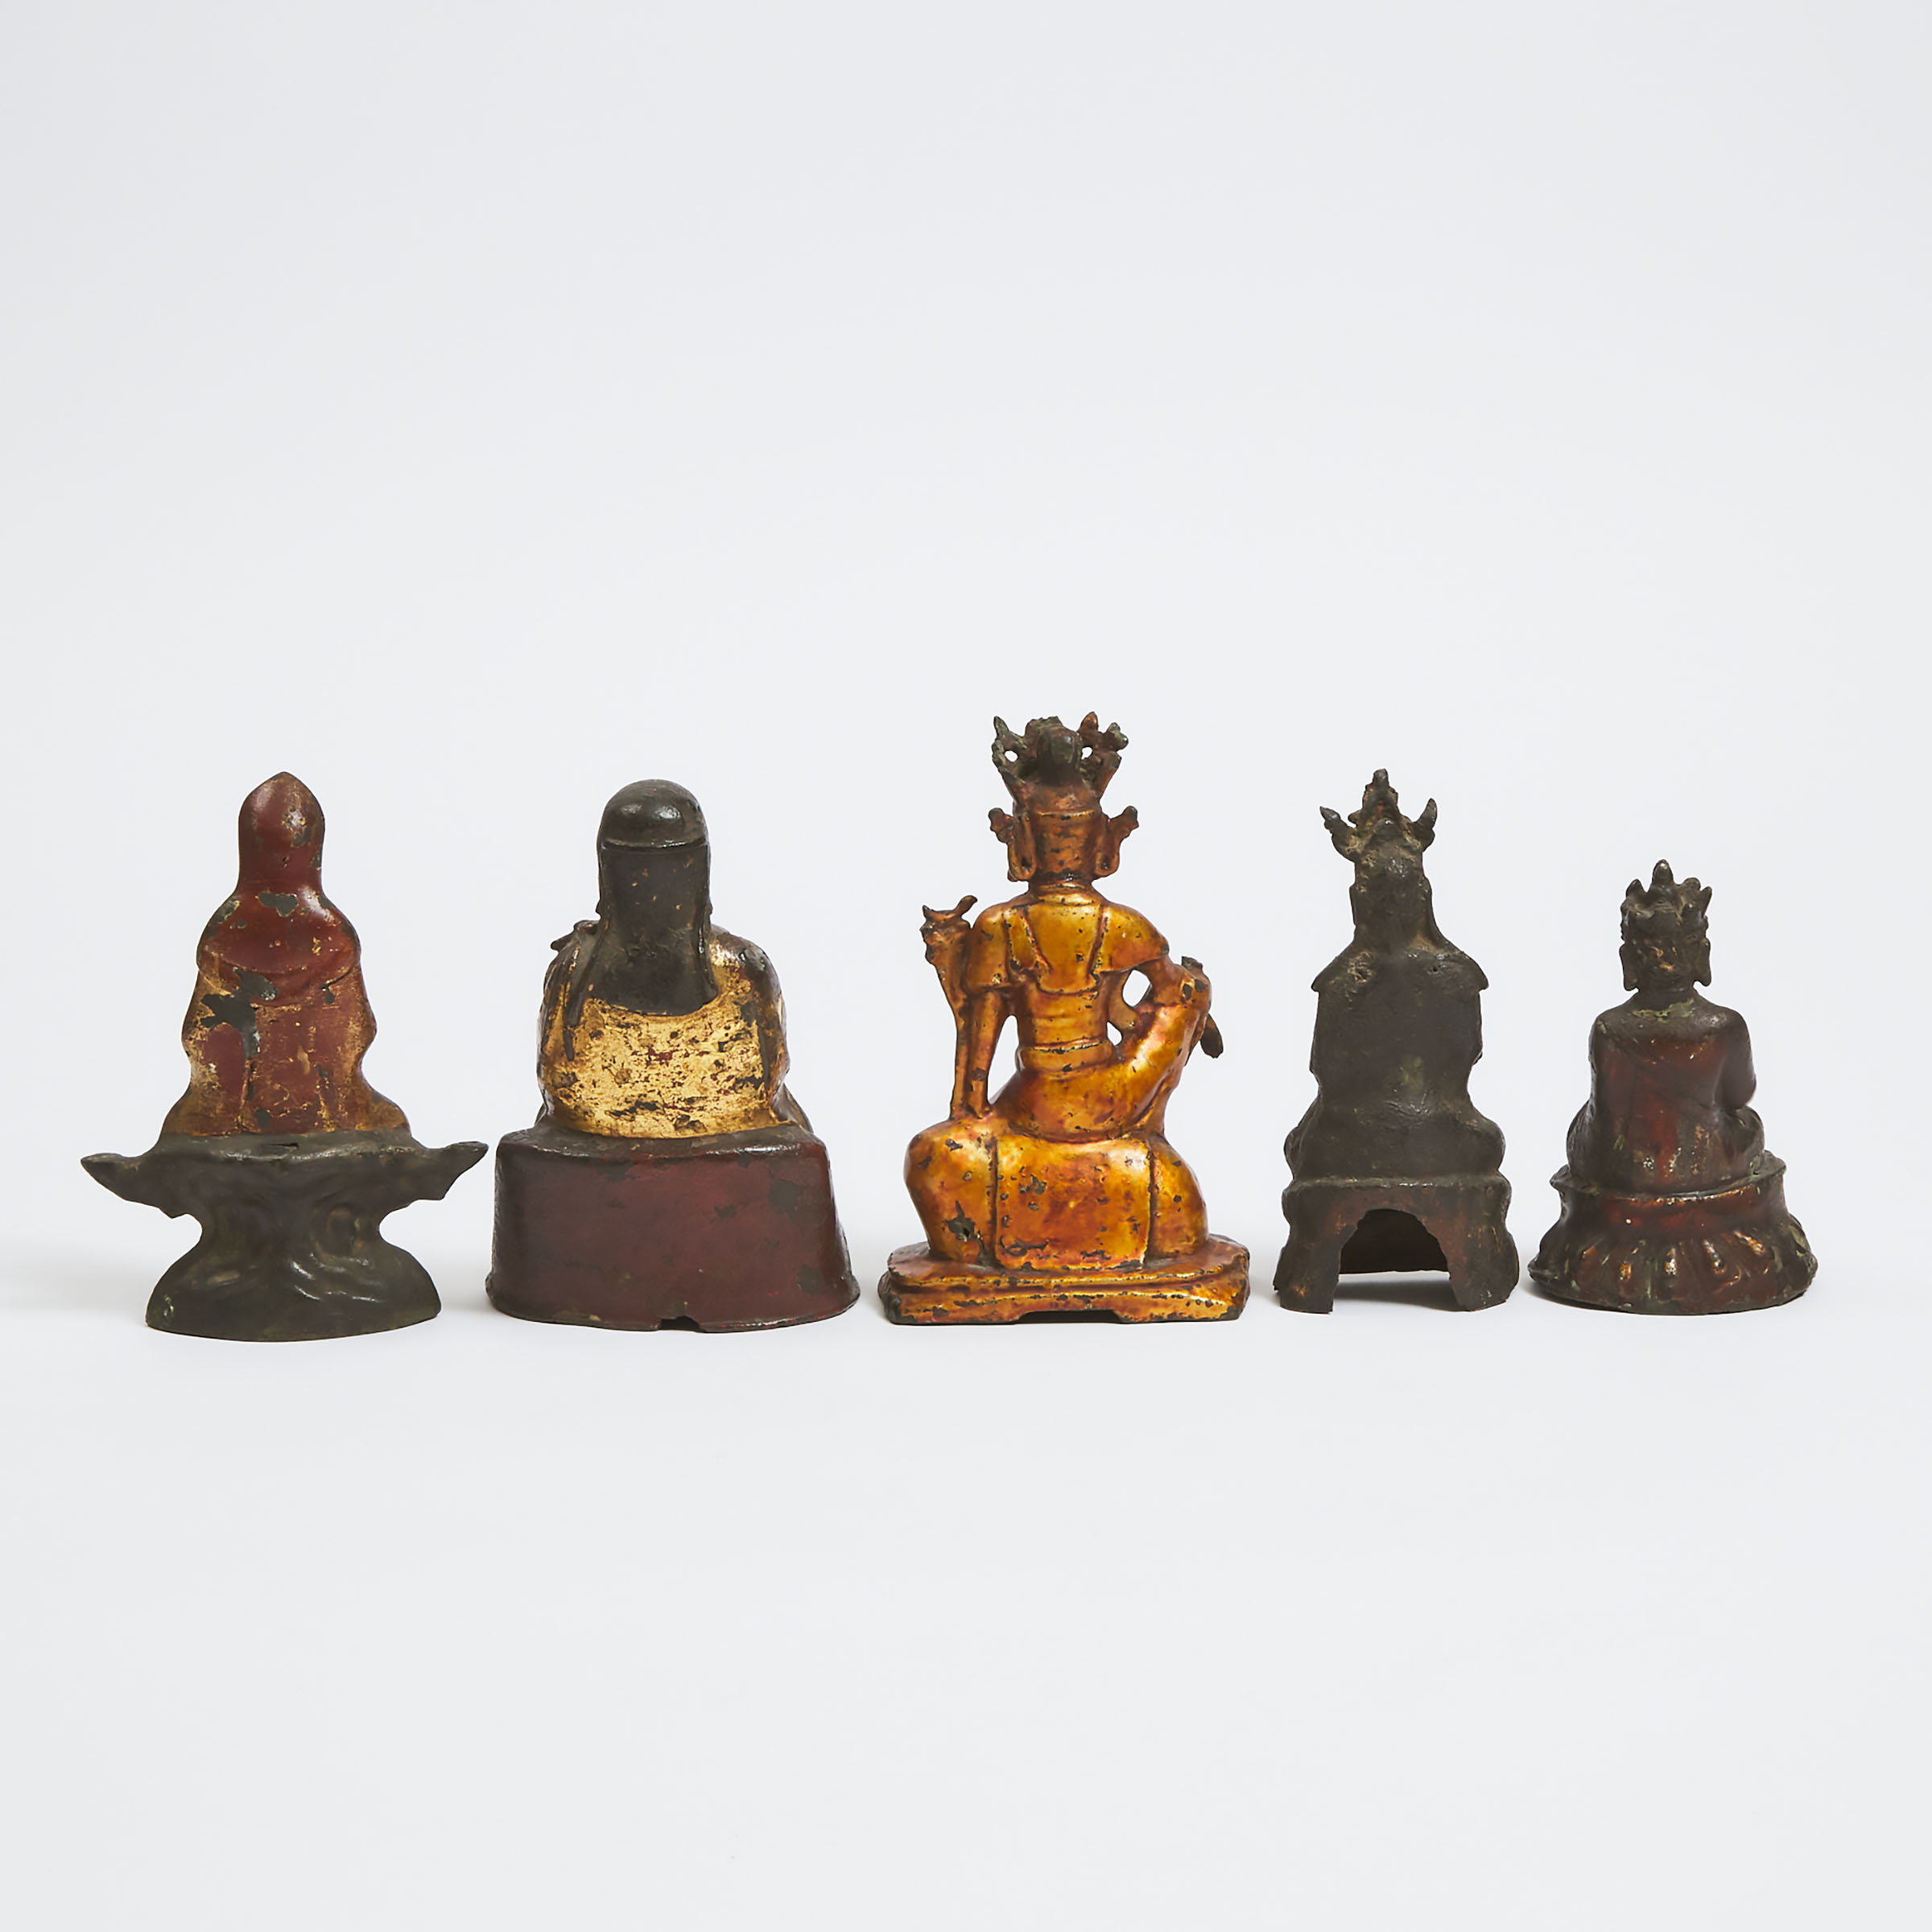 A Group of Five Bronze Figures, Ming Dynasty, 16th/17th Century